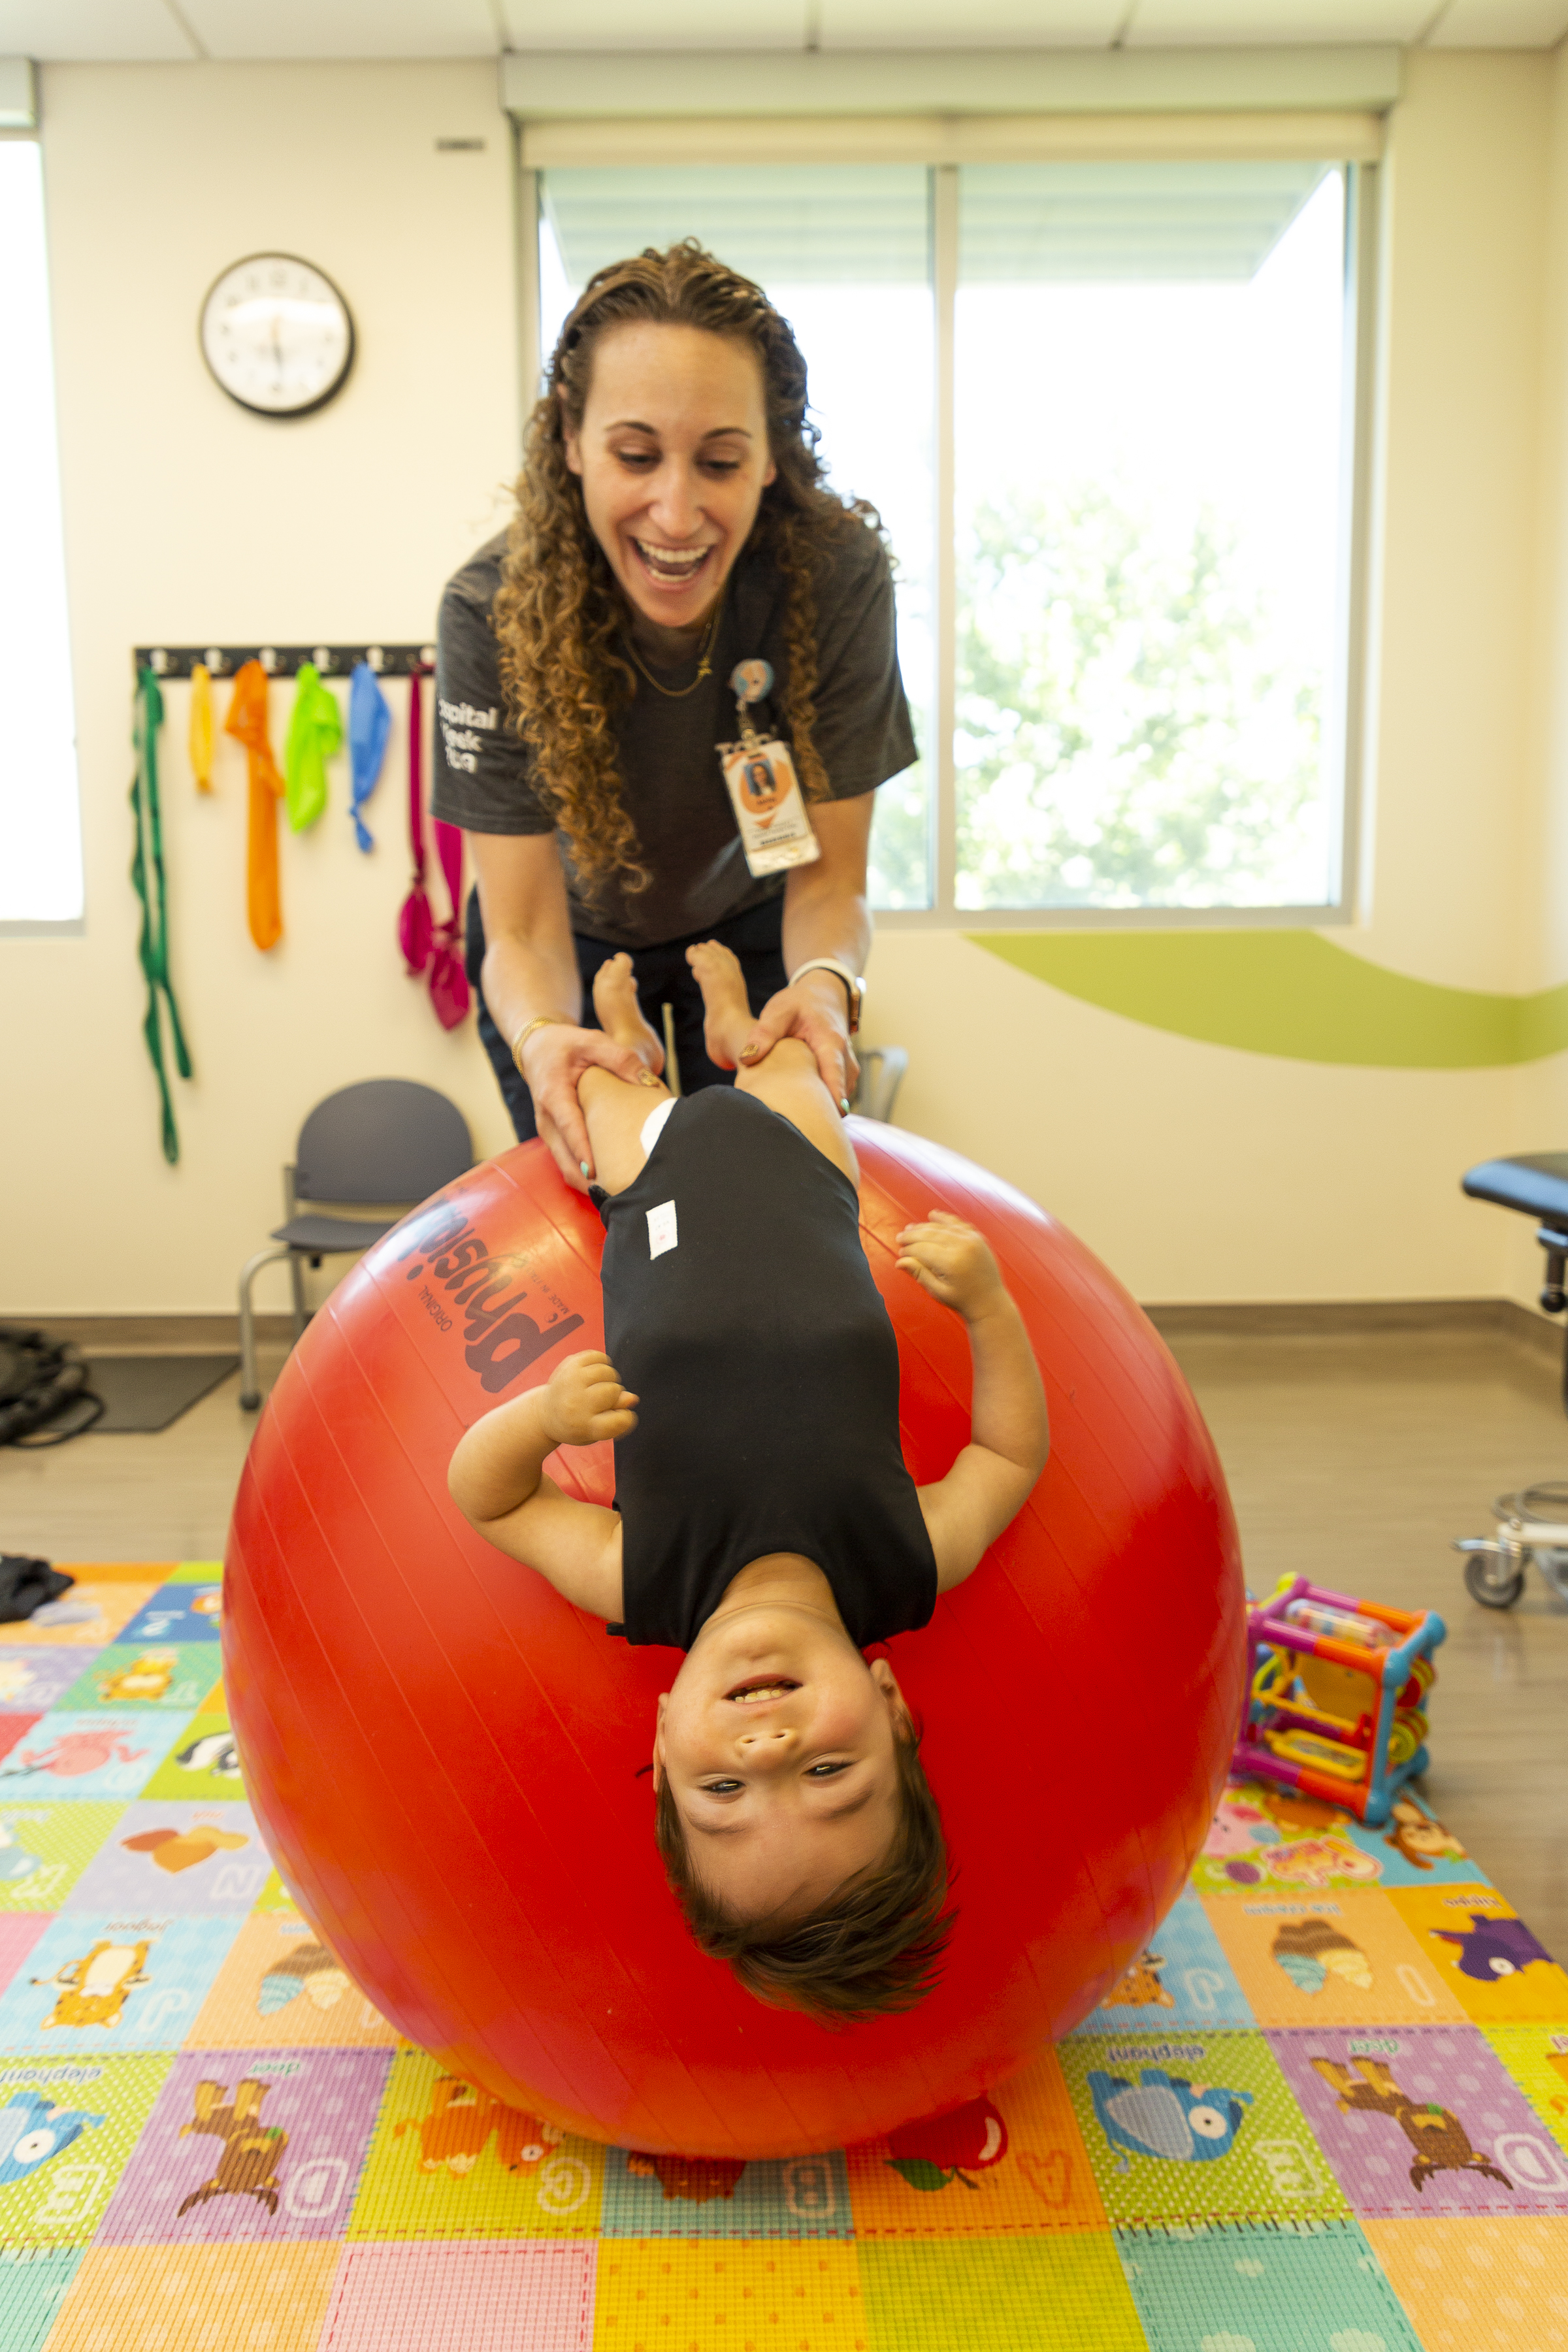 A healthcare worker holds a toddler boy by his legs as he lays back on a giant, inflatable ball. They are in a colorful, child-friendly rehabilitation room.